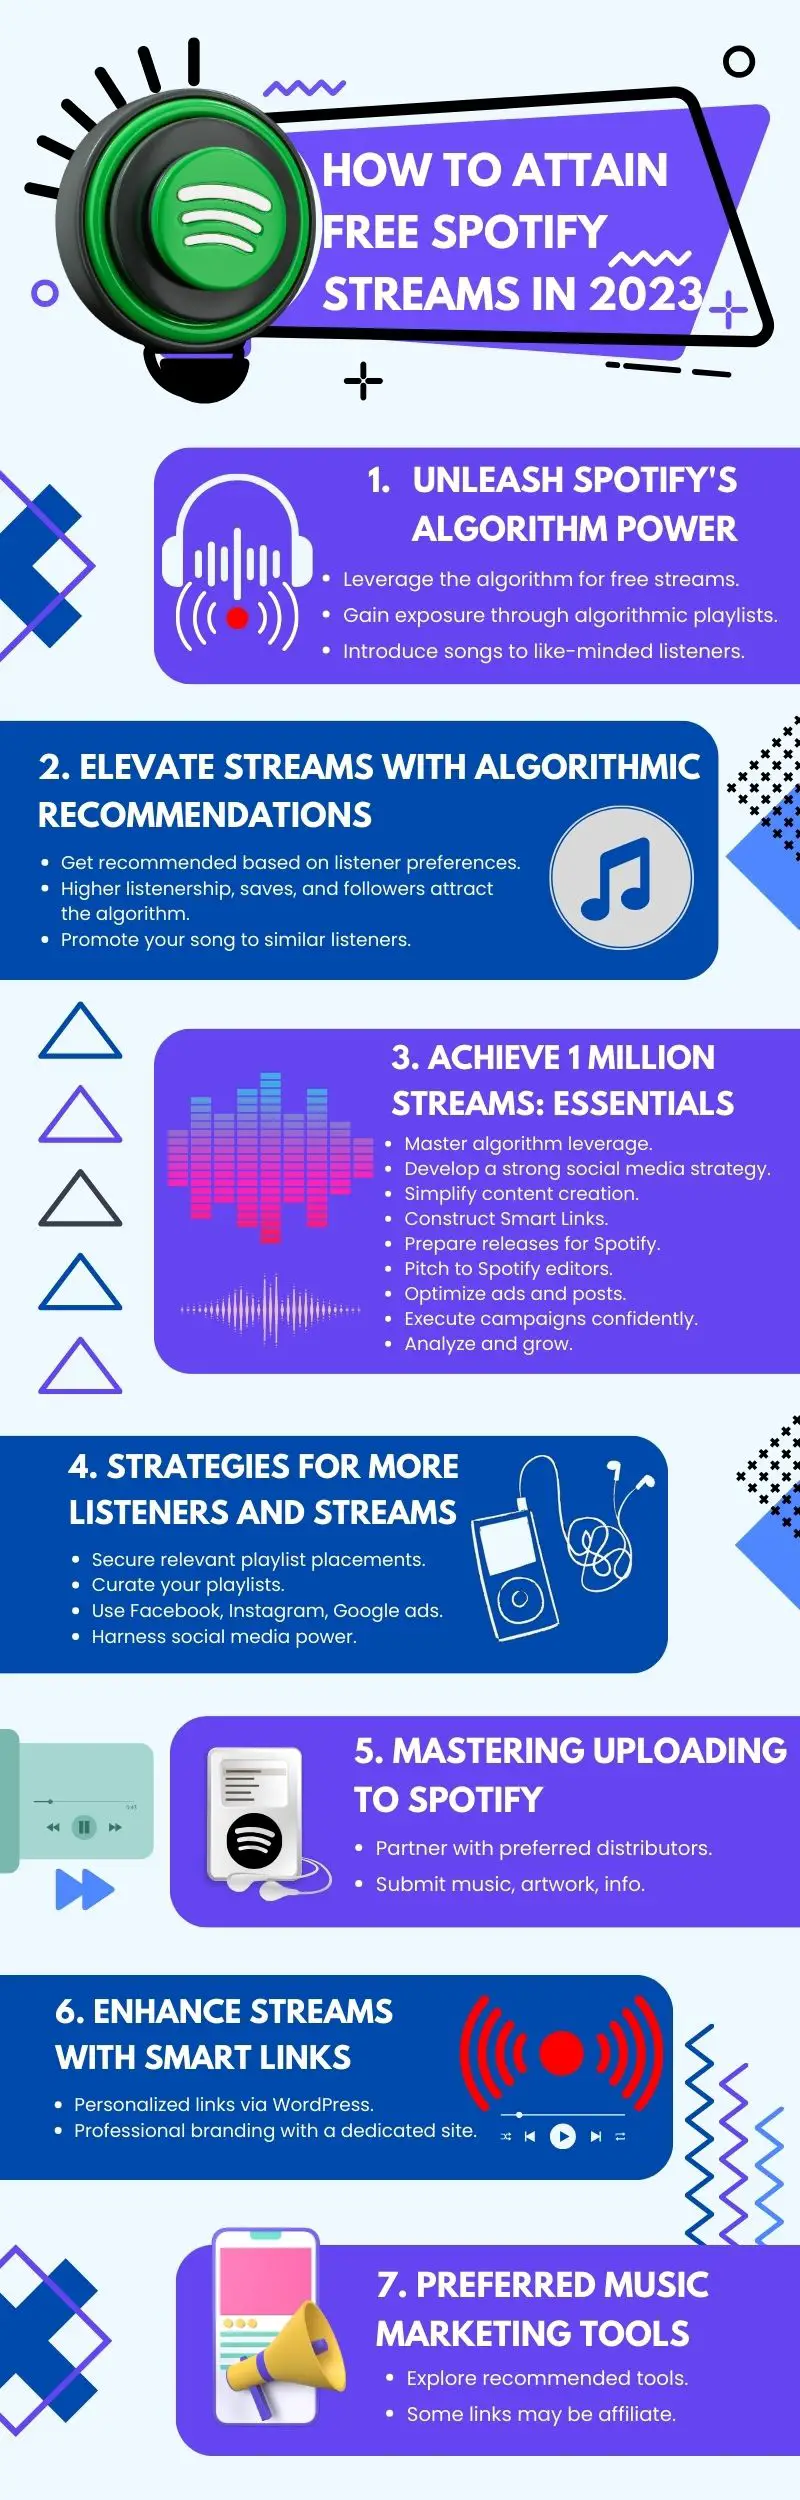 How to get free spotify streams guide